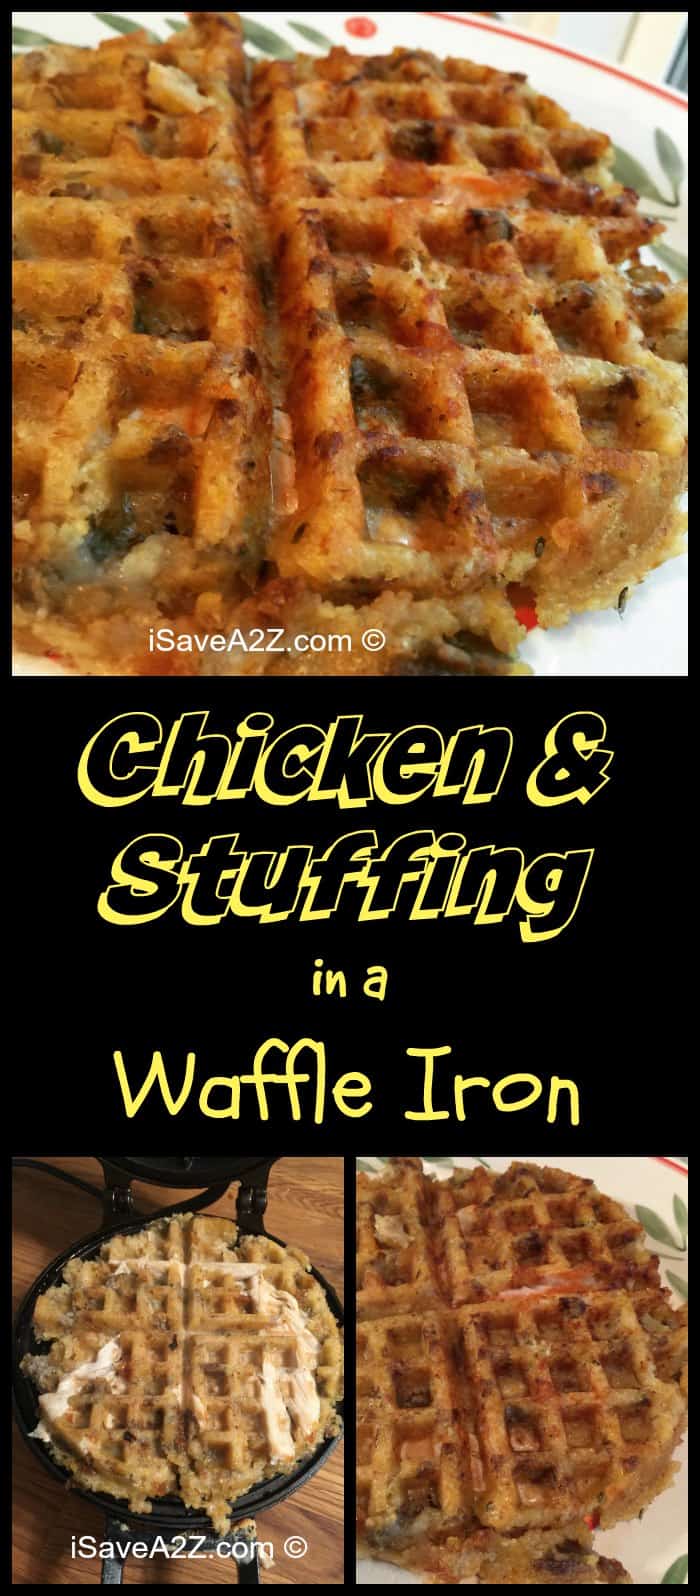 We heated up some Chicken and Stuffing in a waffle iron and it came out amazing!